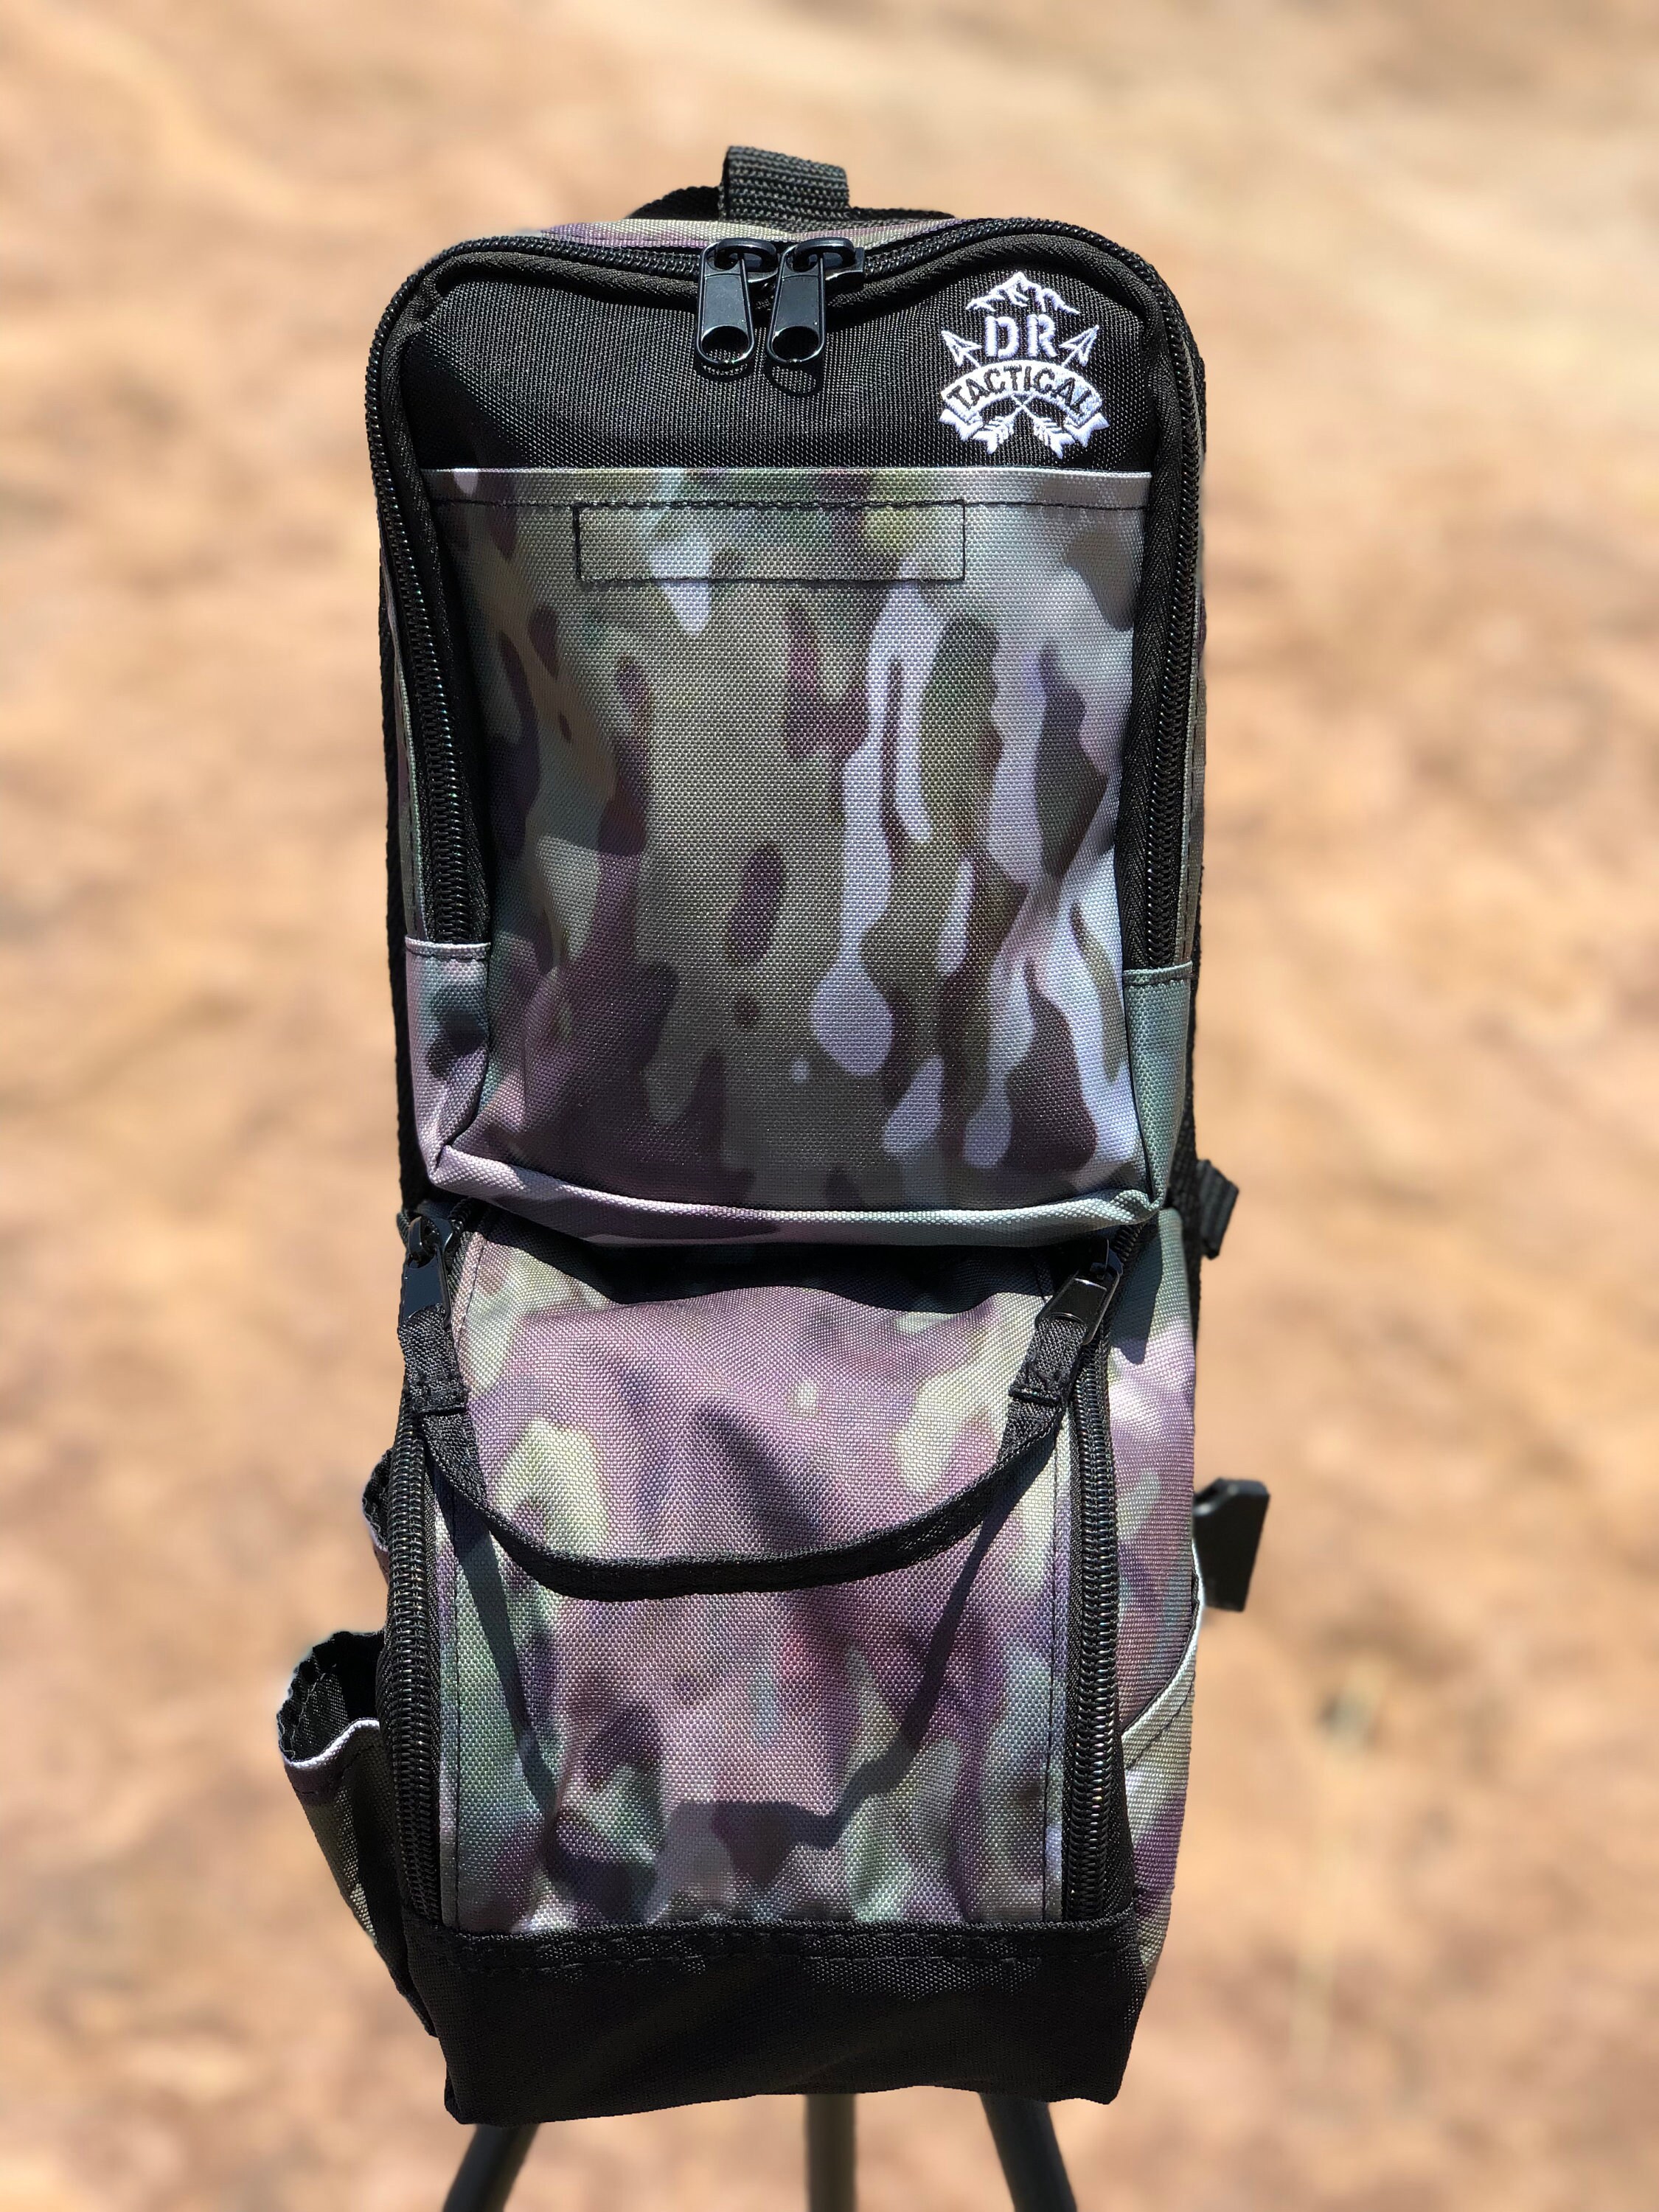 The Booty Duty bag: tactical toiletry for camping, fishing and